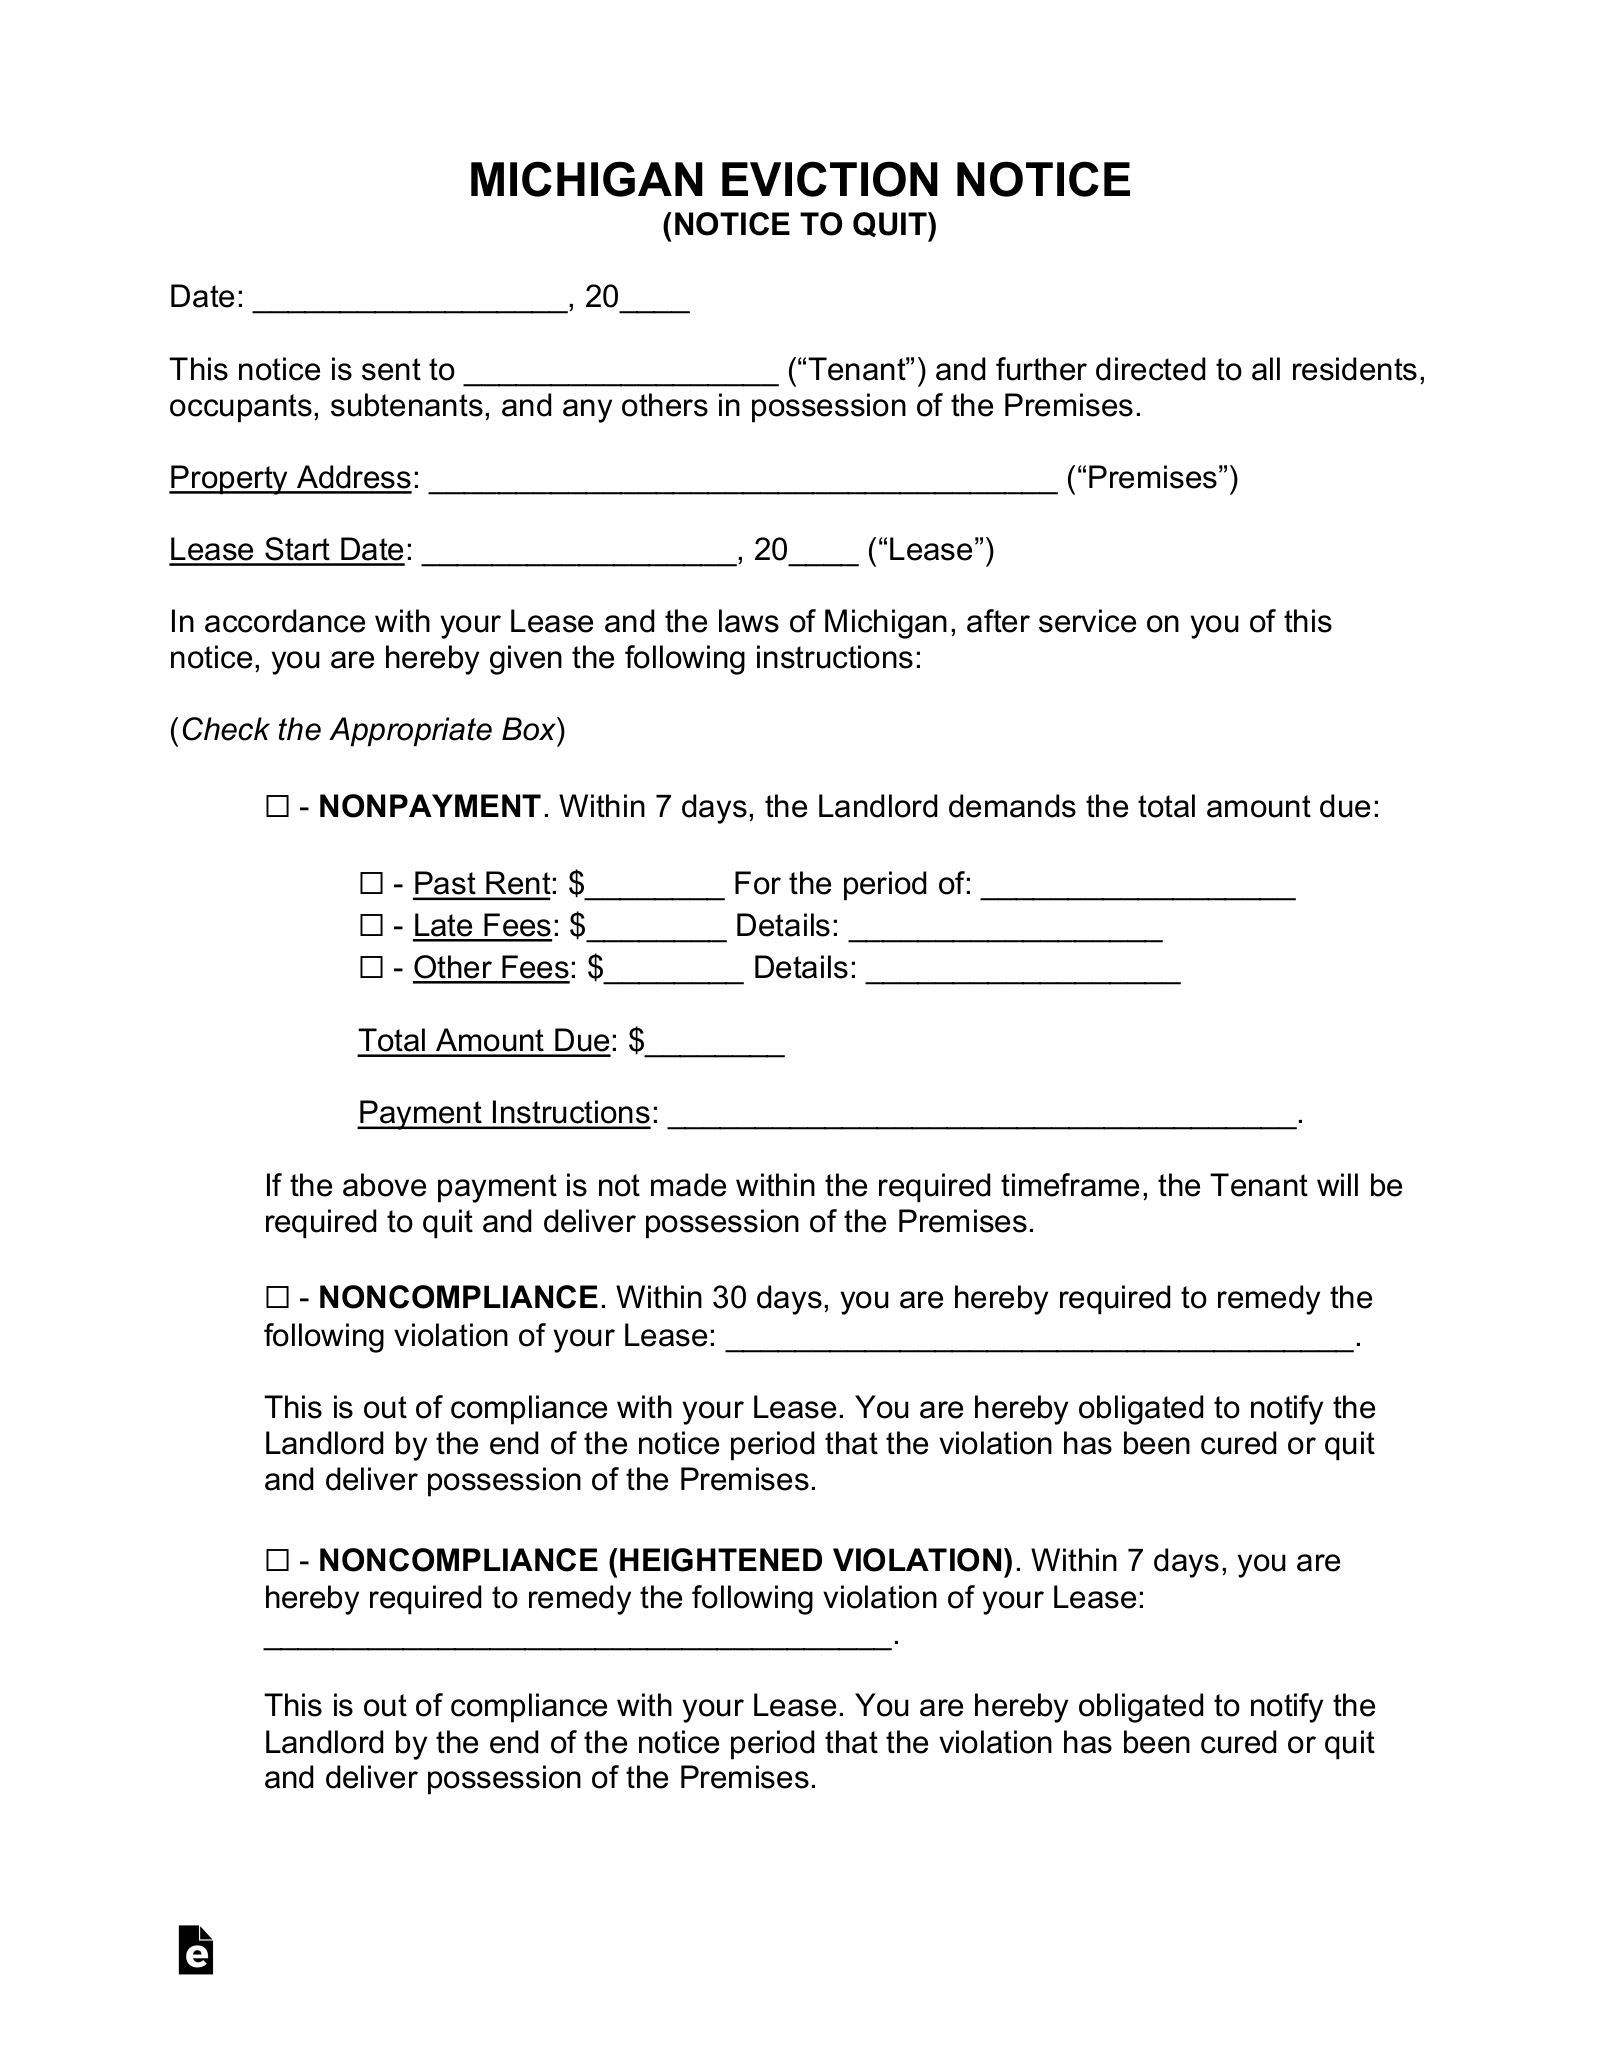 free-michigan-eviction-notice-forms-4-pdf-word-eforms